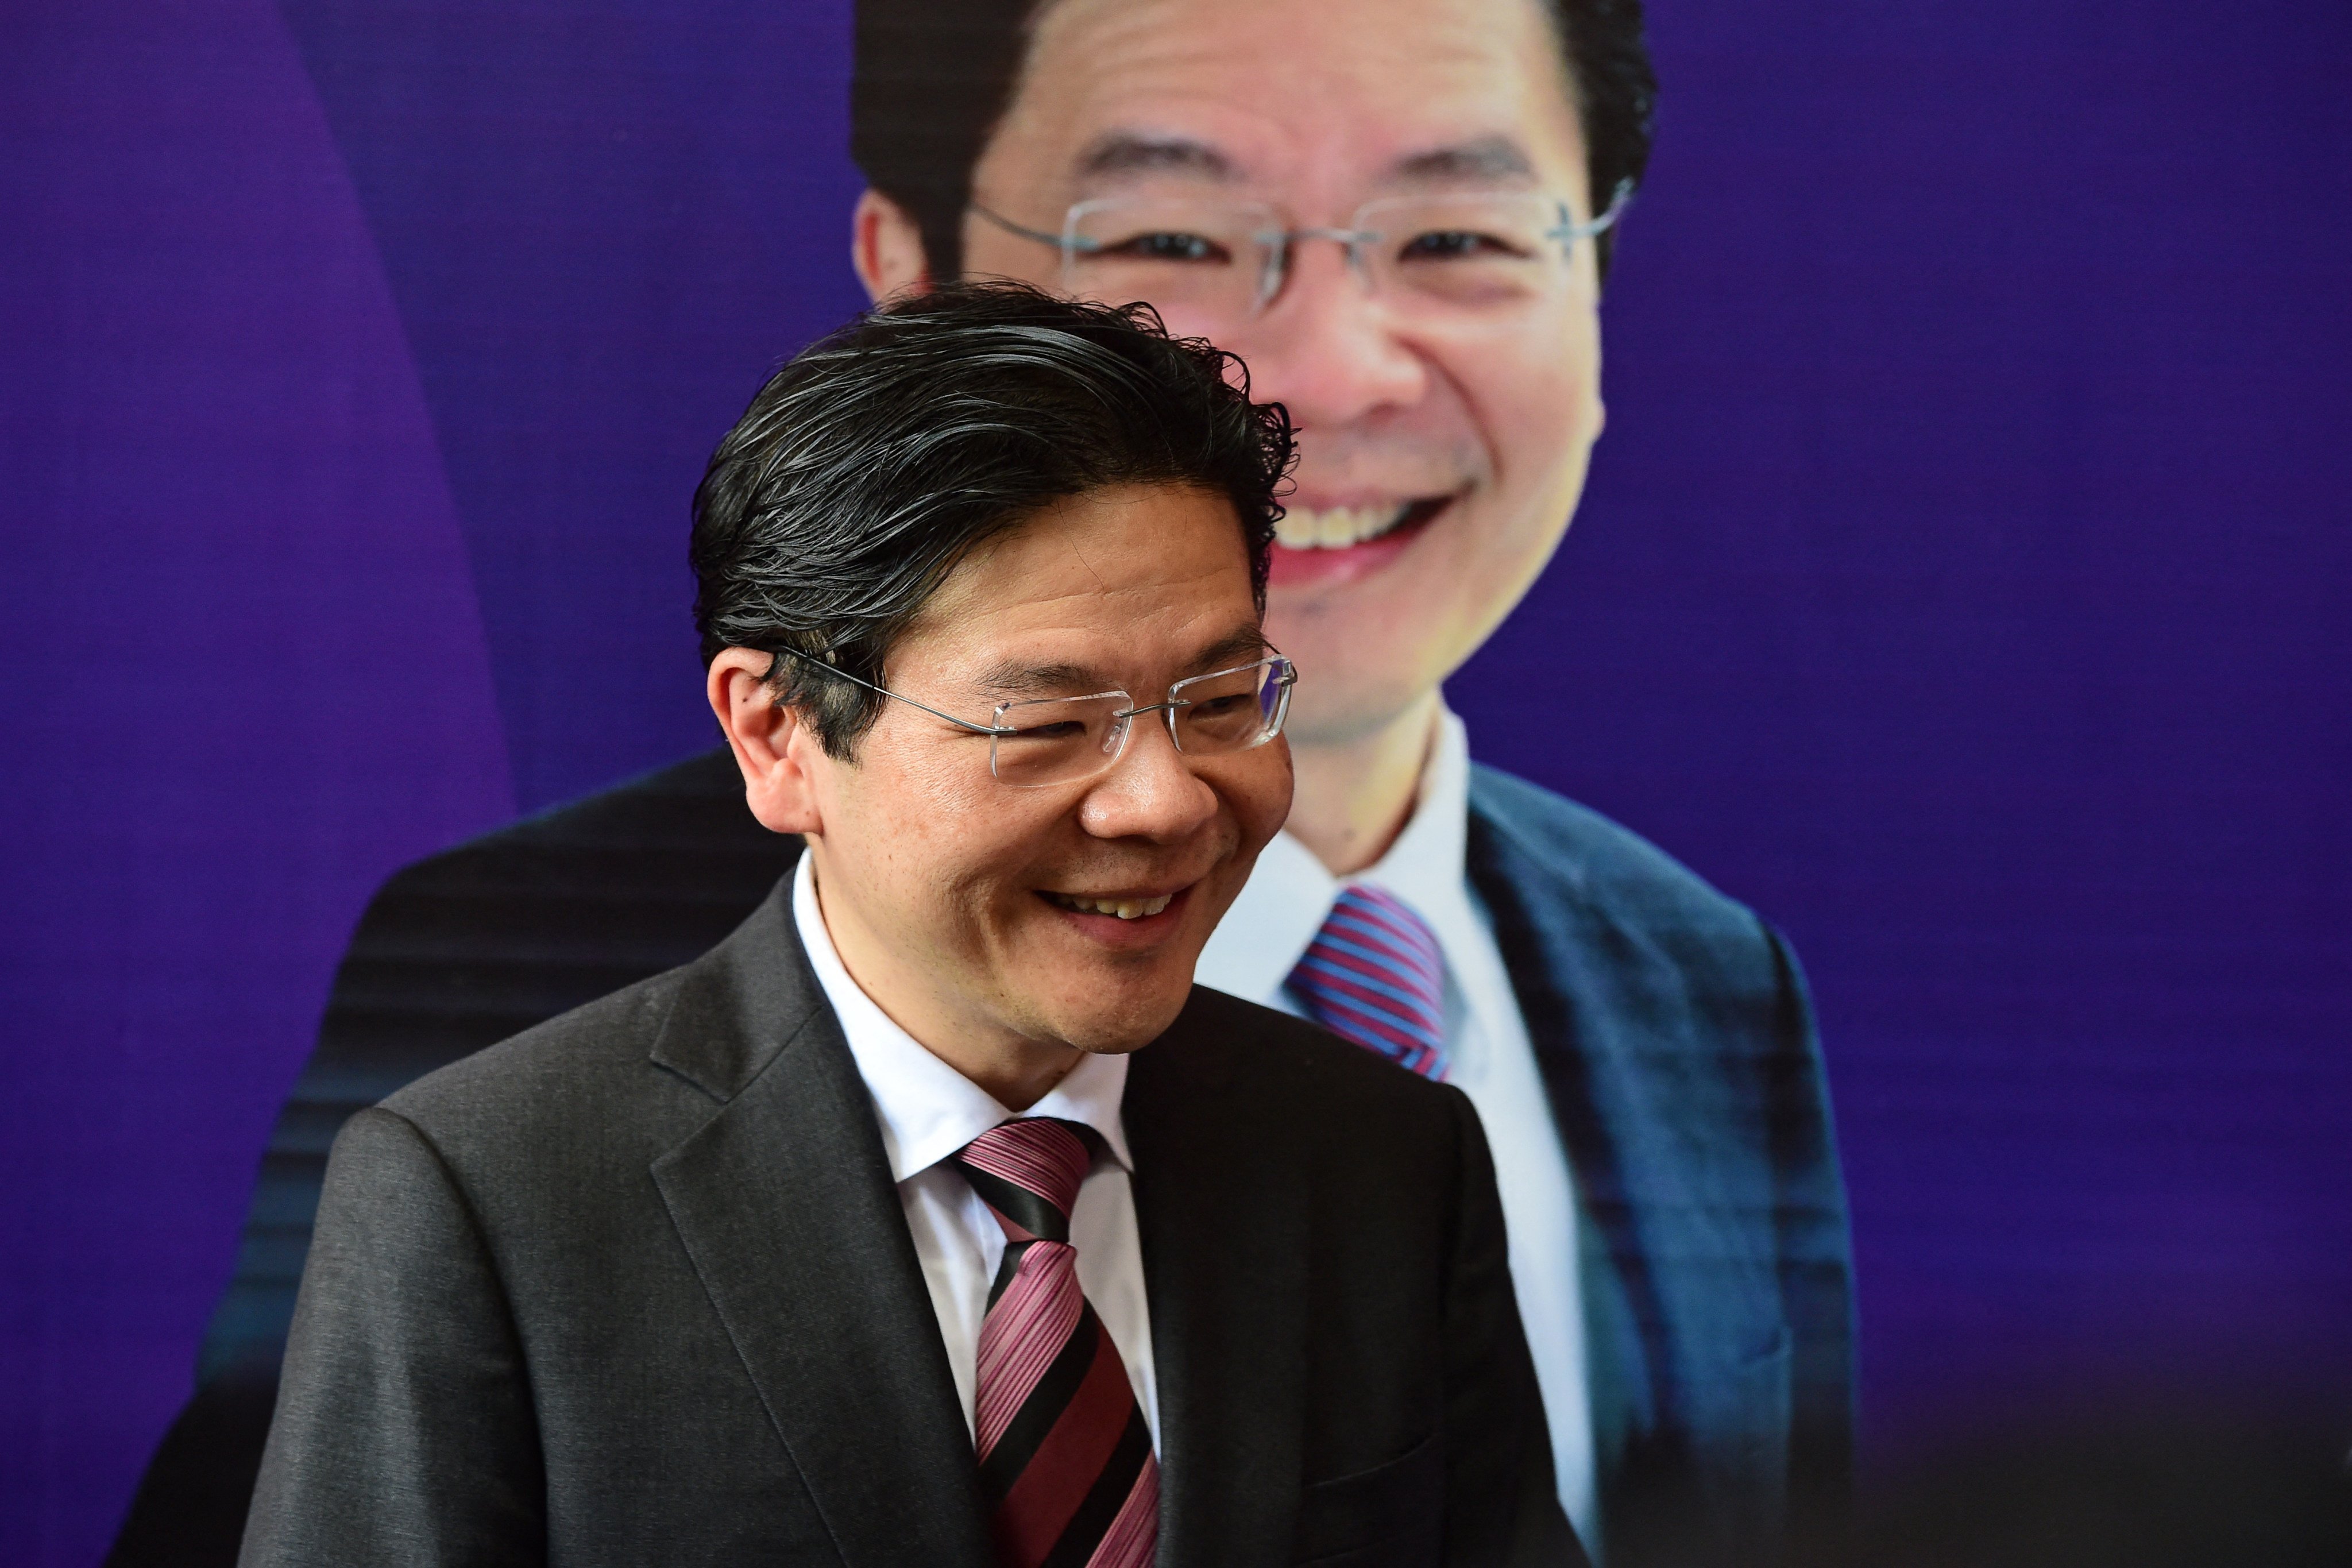 Deputy Prime Minister and Finance Minister Lawrence Wong. Analysts say navigating the US-China relationship will be the biggest test for Wong, who will take over as Singapore’s fourth prime minister on May 15. Photo: AFP